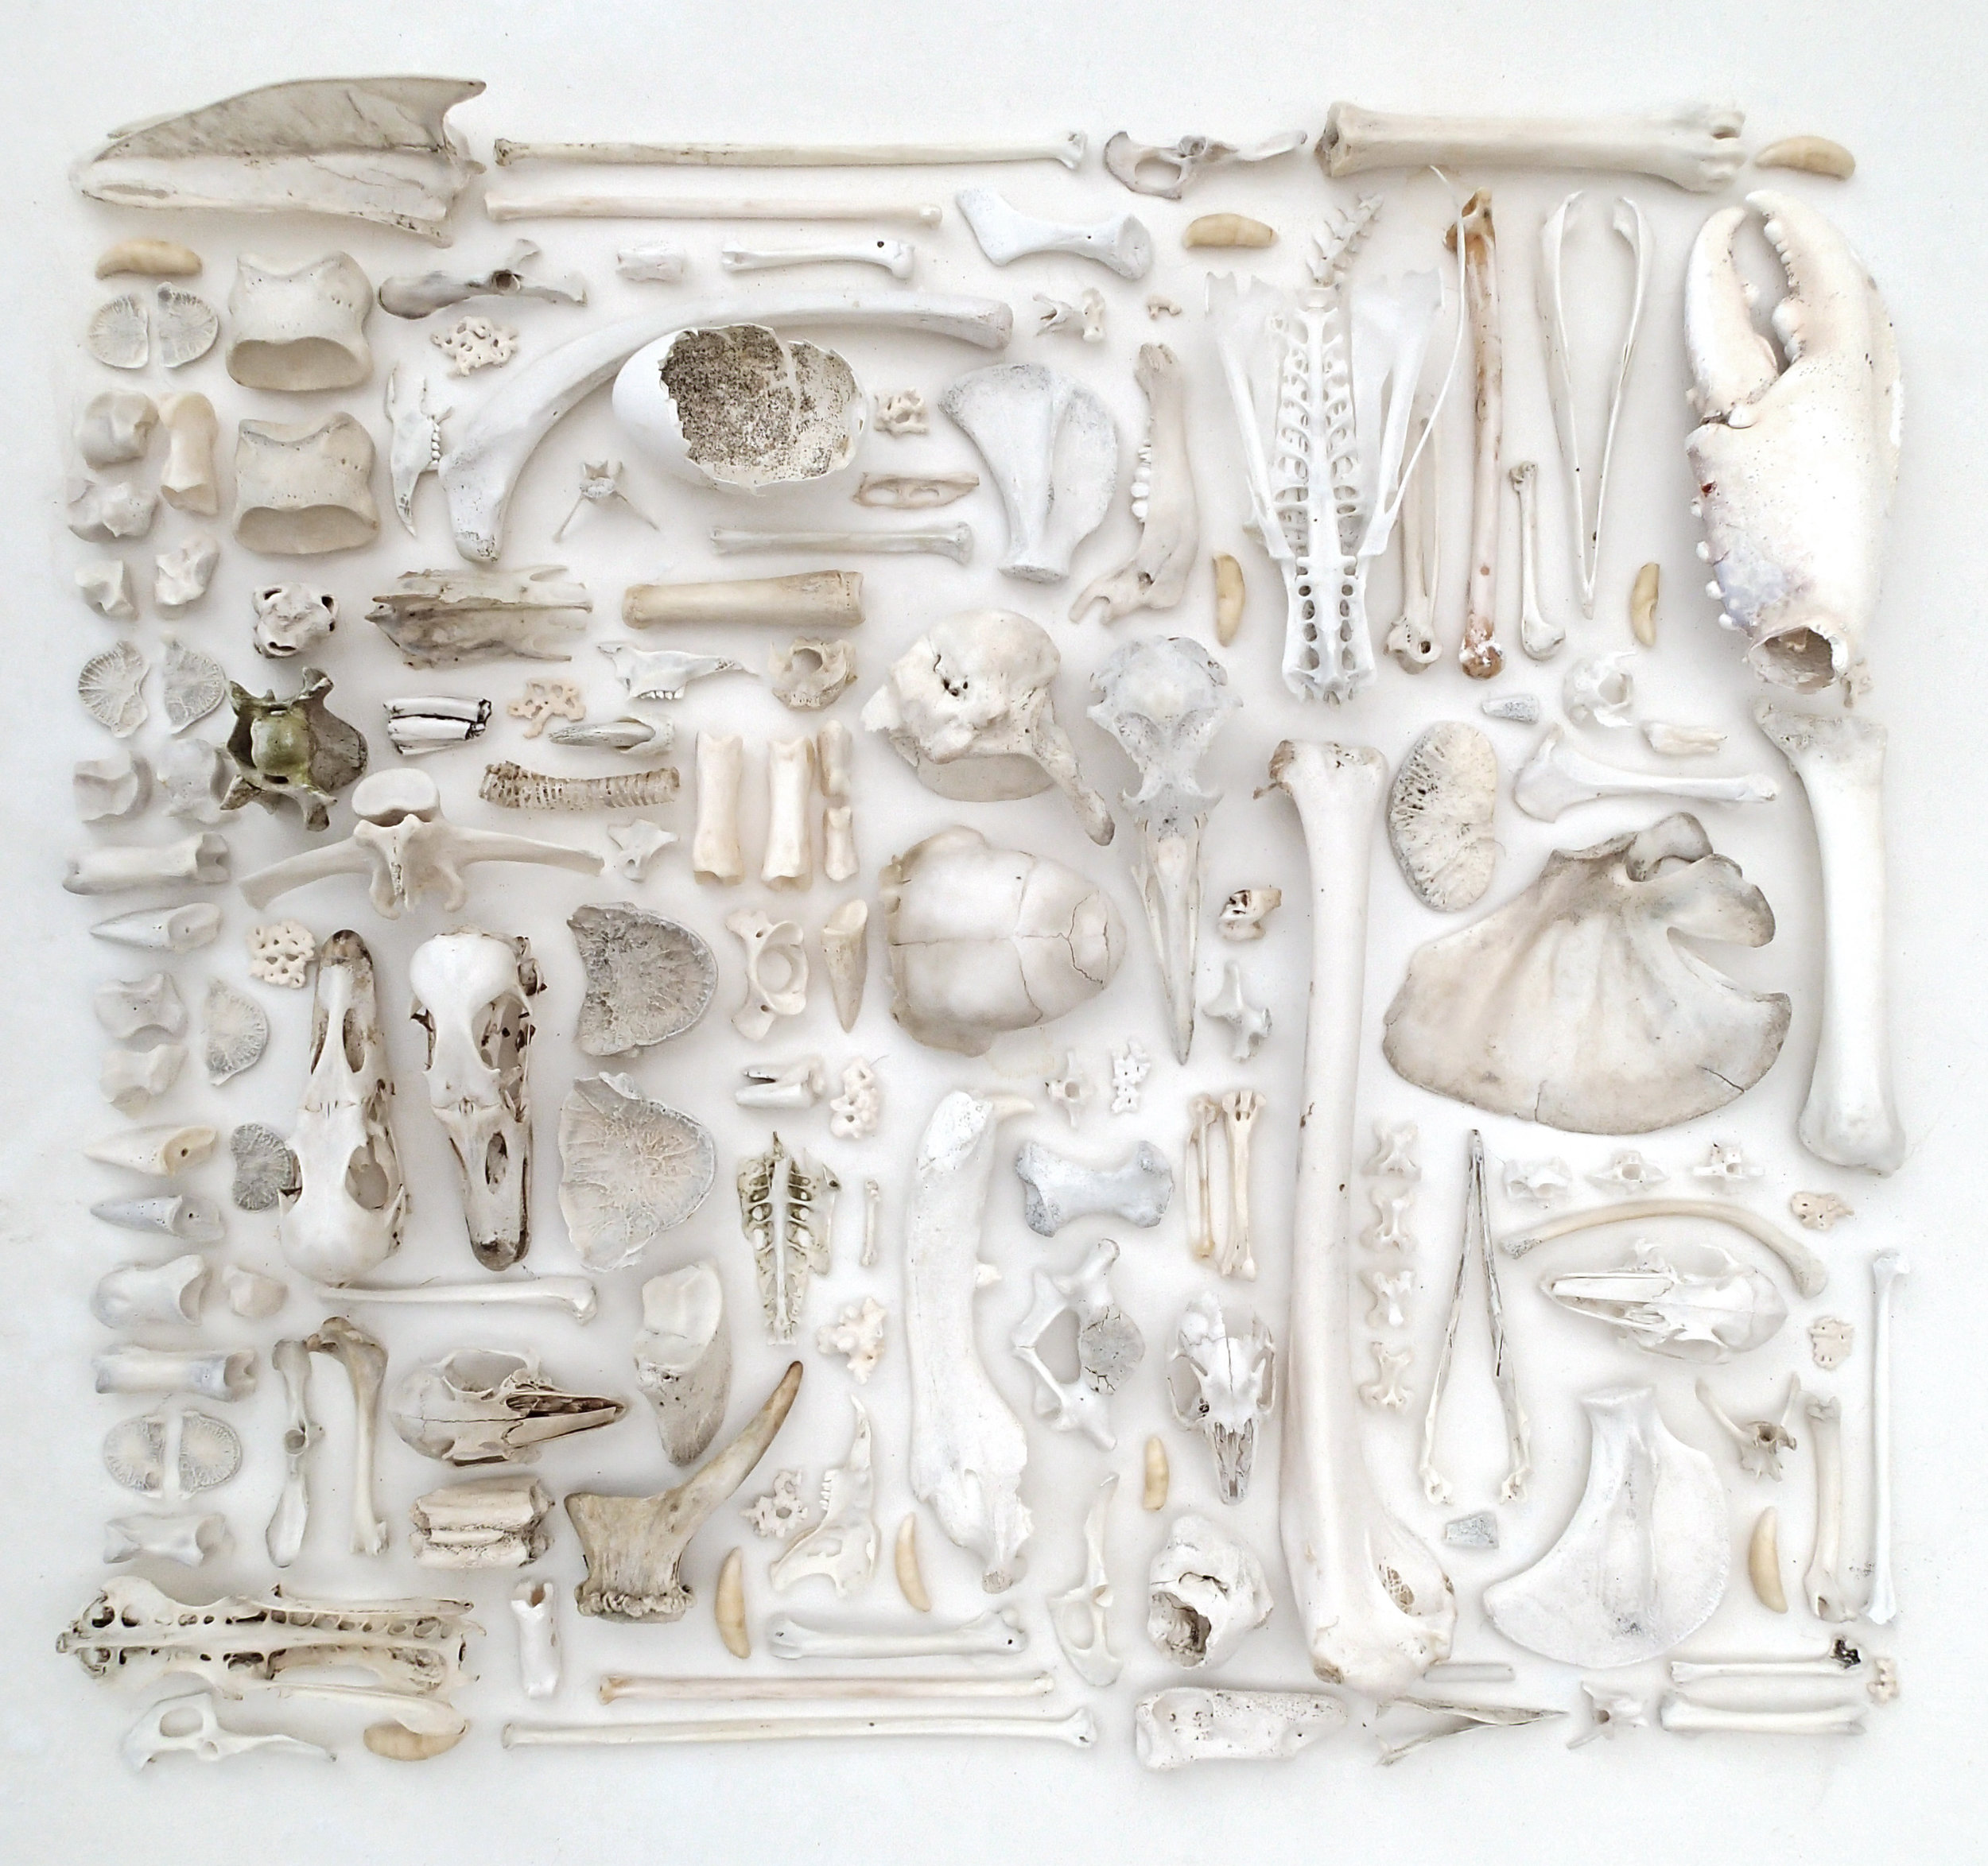  As We Are Now (i)  Mixed faunal remains, 100 x 100cms, 2014                                                                                                                                        